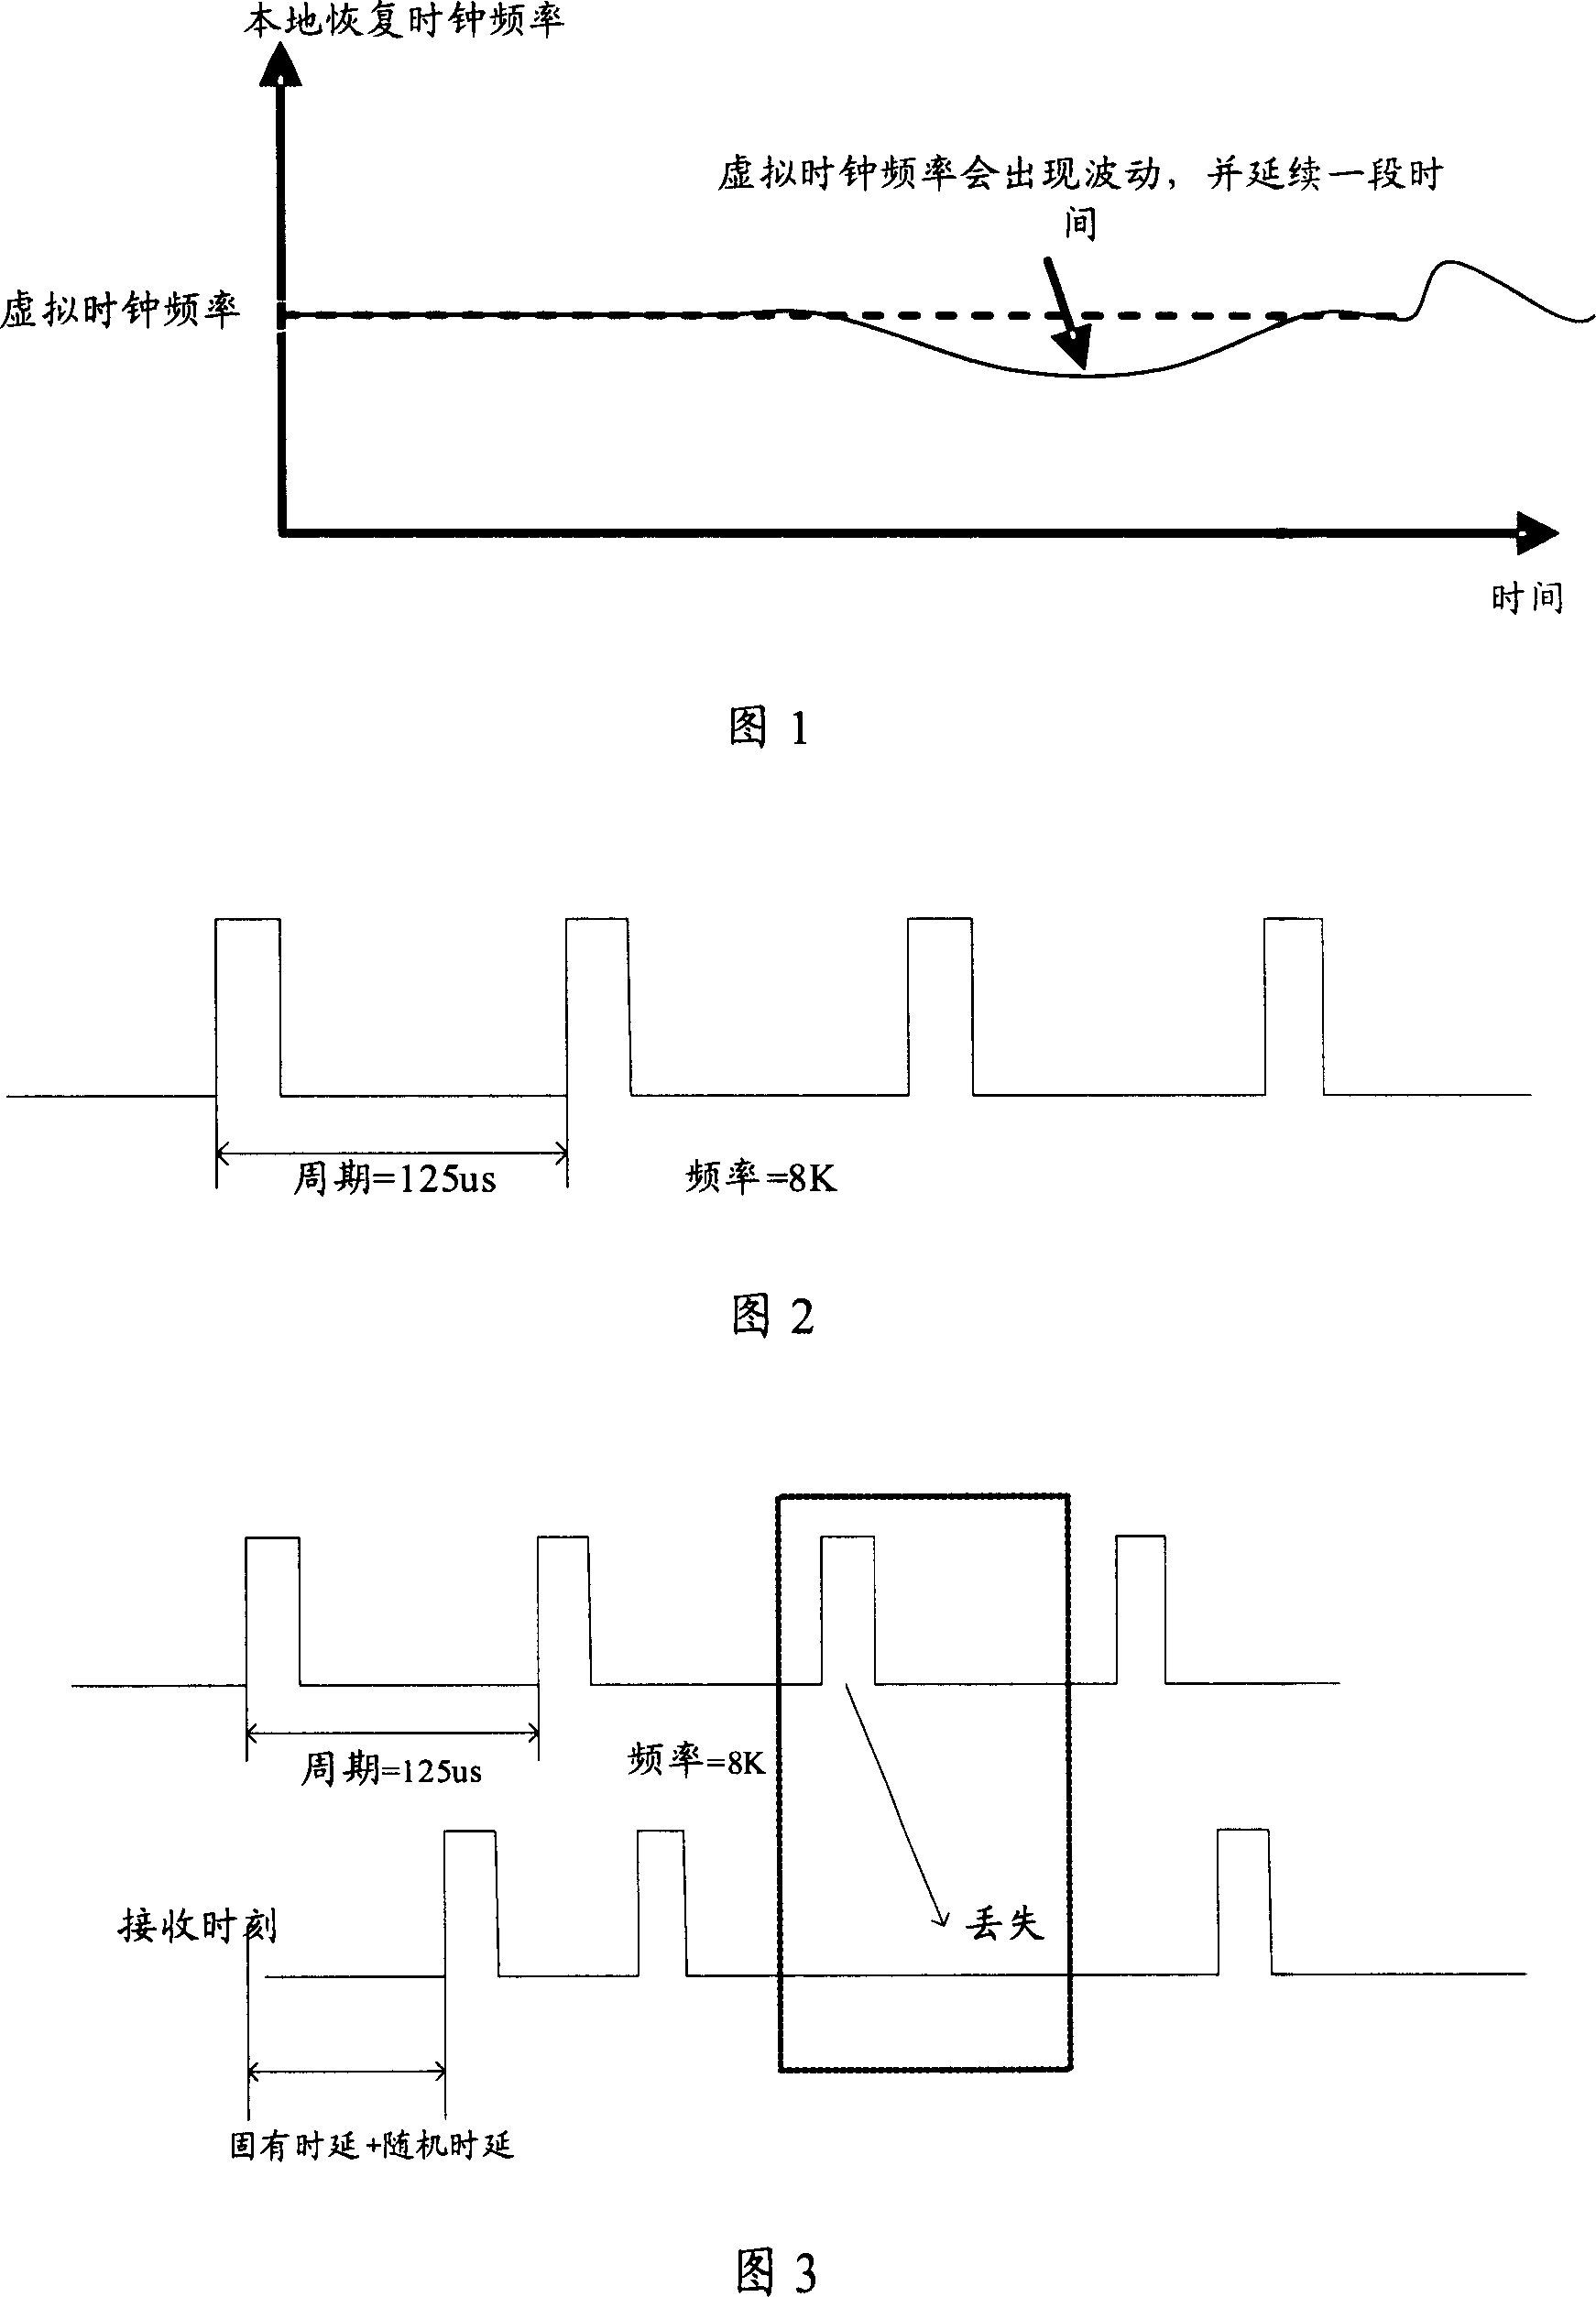 Method for regulating clock frequency customer terminal and system